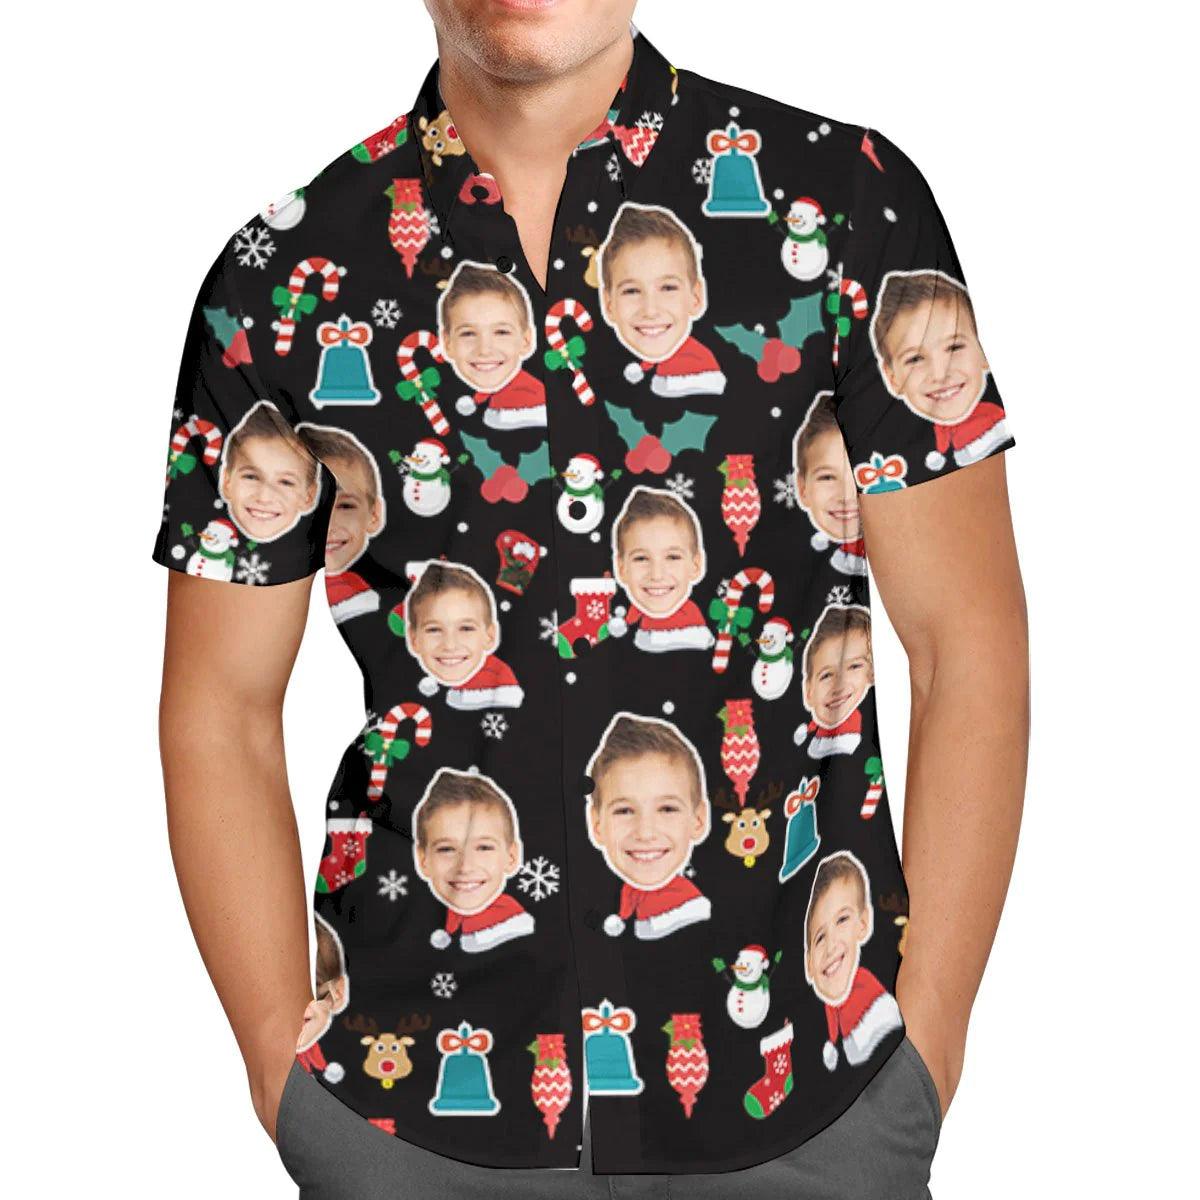 Festive Face Hawaiian Shirt - Personalized Christmas Candy Cane Holiday Gift Idea, Custom Printed Short Sleeve Button Up - Unique Memento